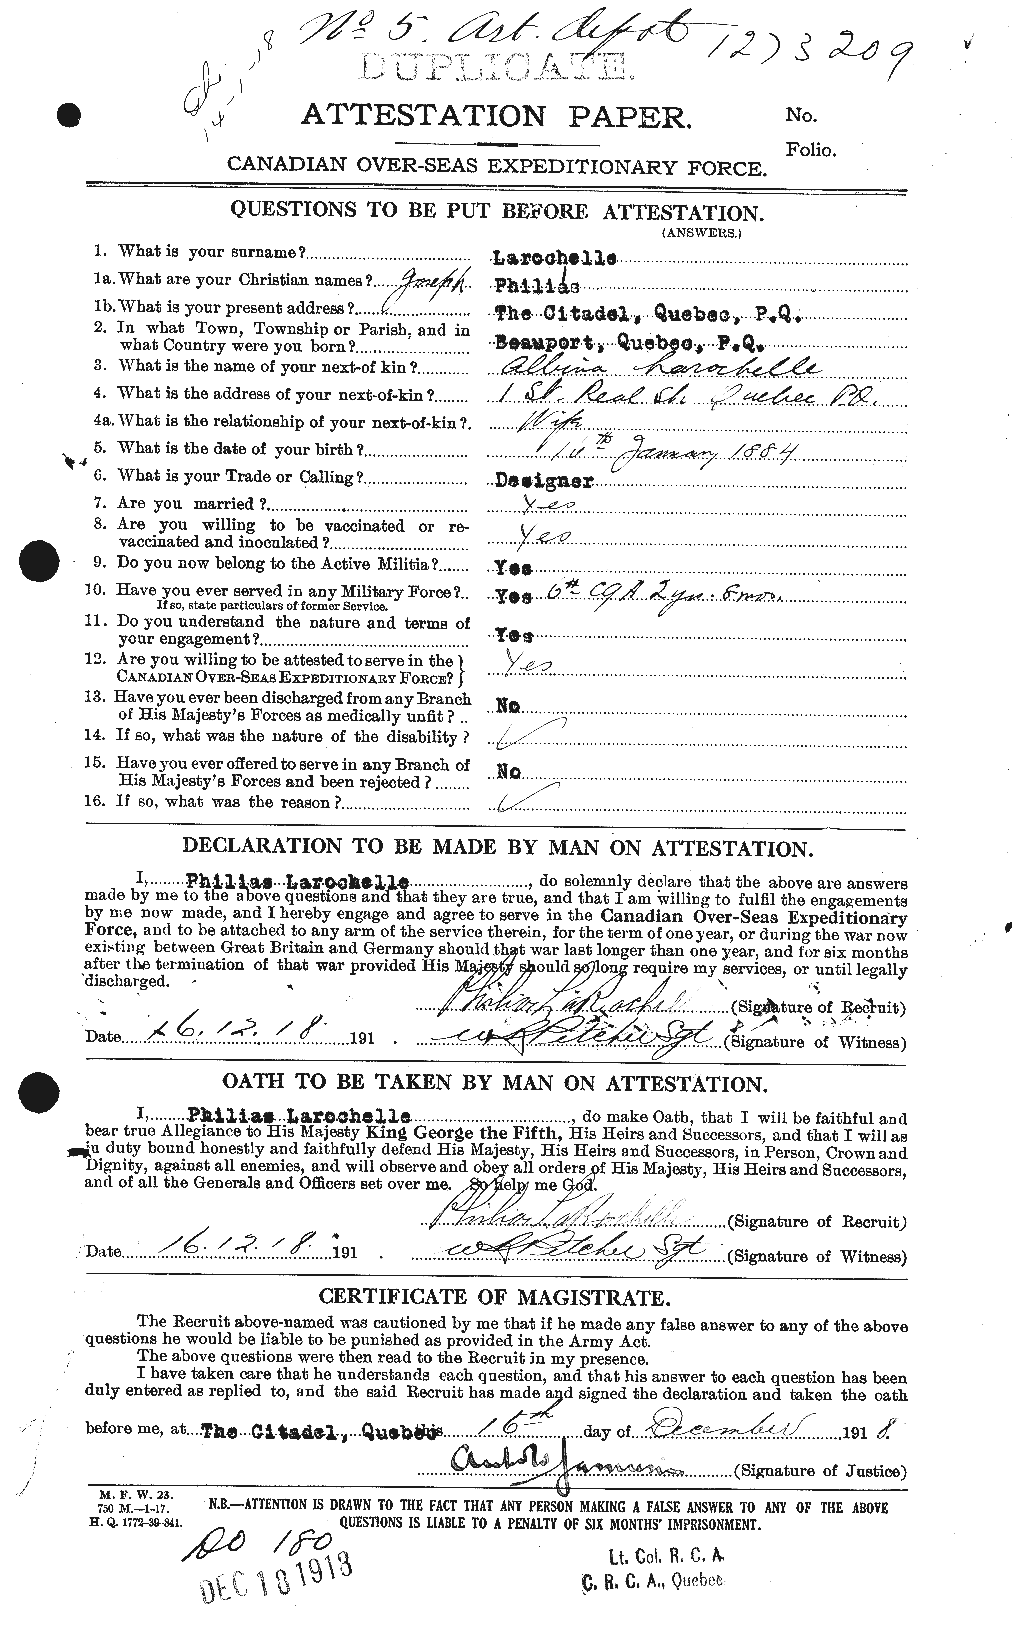 Personnel Records of the First World War - CEF 450789a